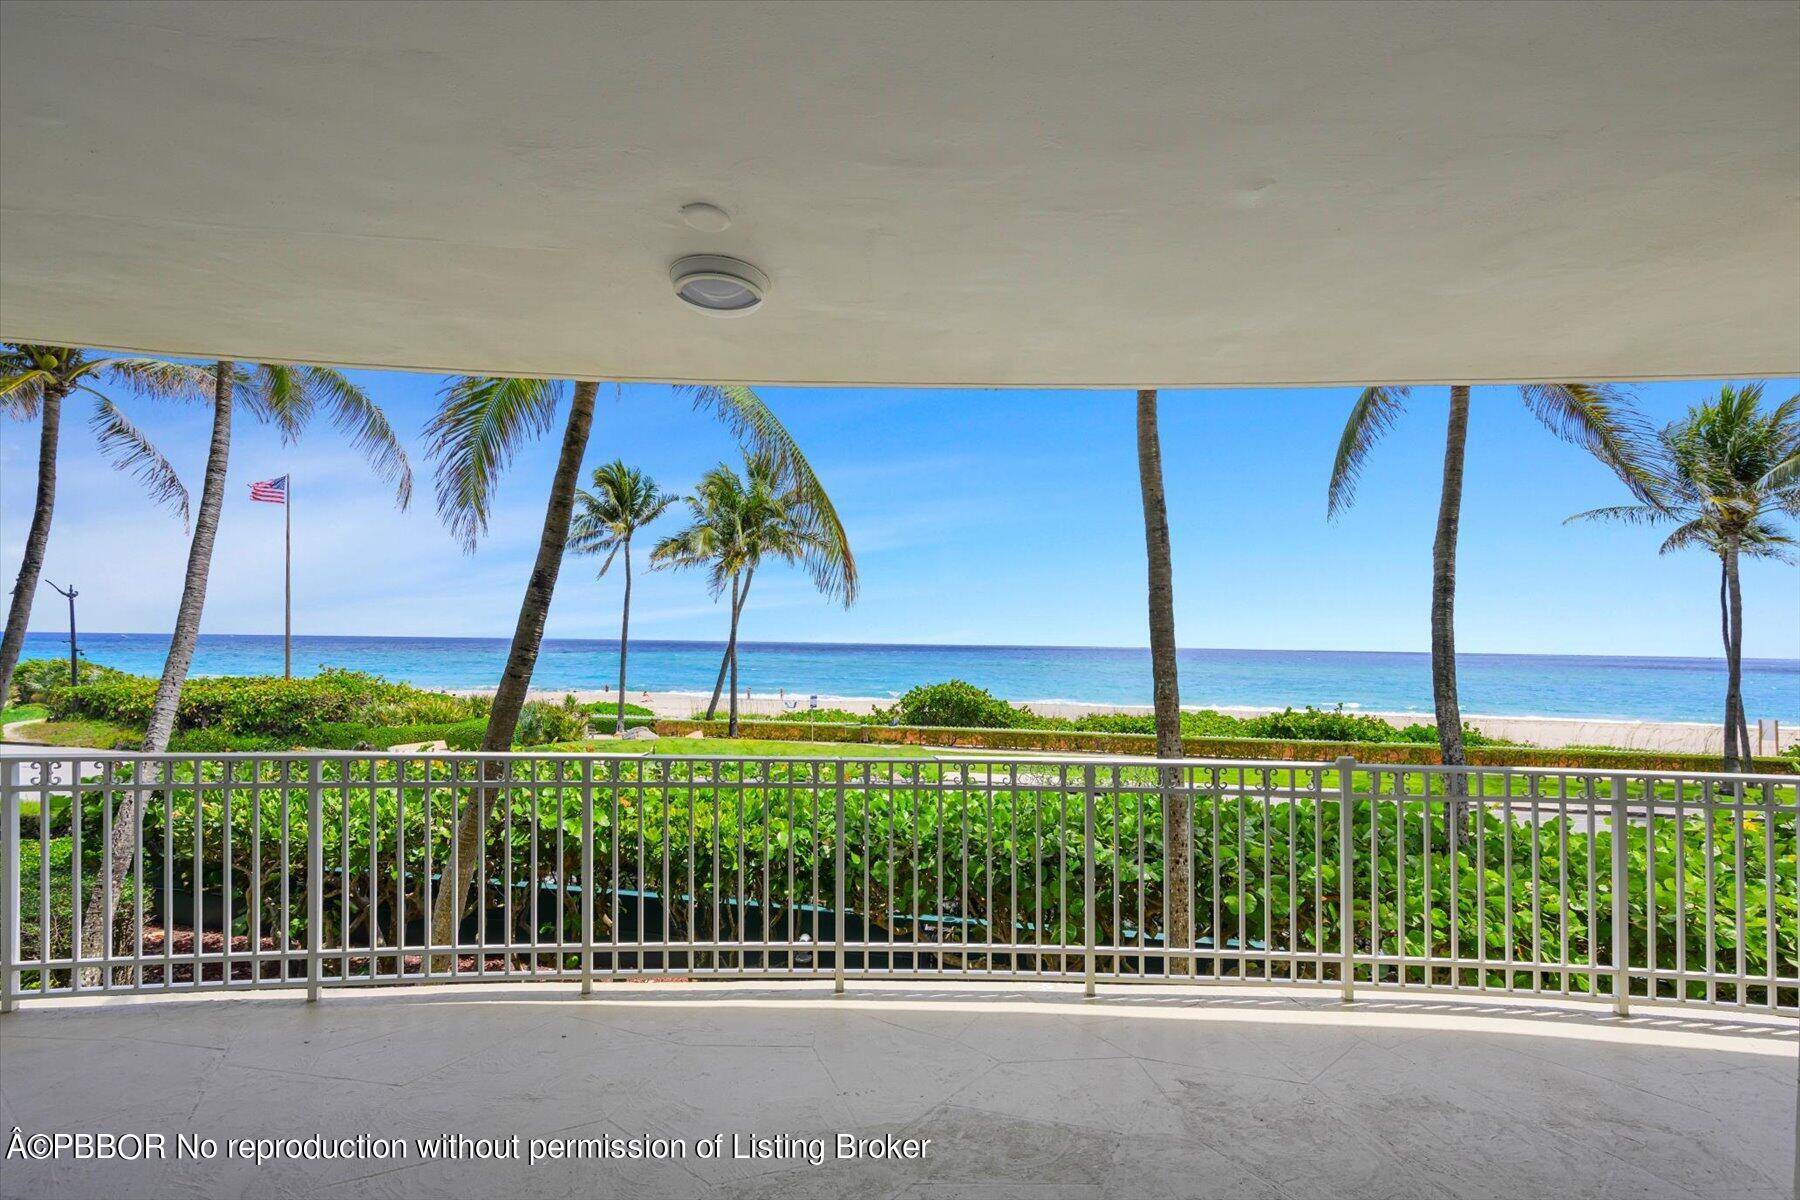 Spacious southeast west facing 3 bedrooms, 3 baths apartment with breathtaking direct Ocean views nestled in the heart of Palm Beach.